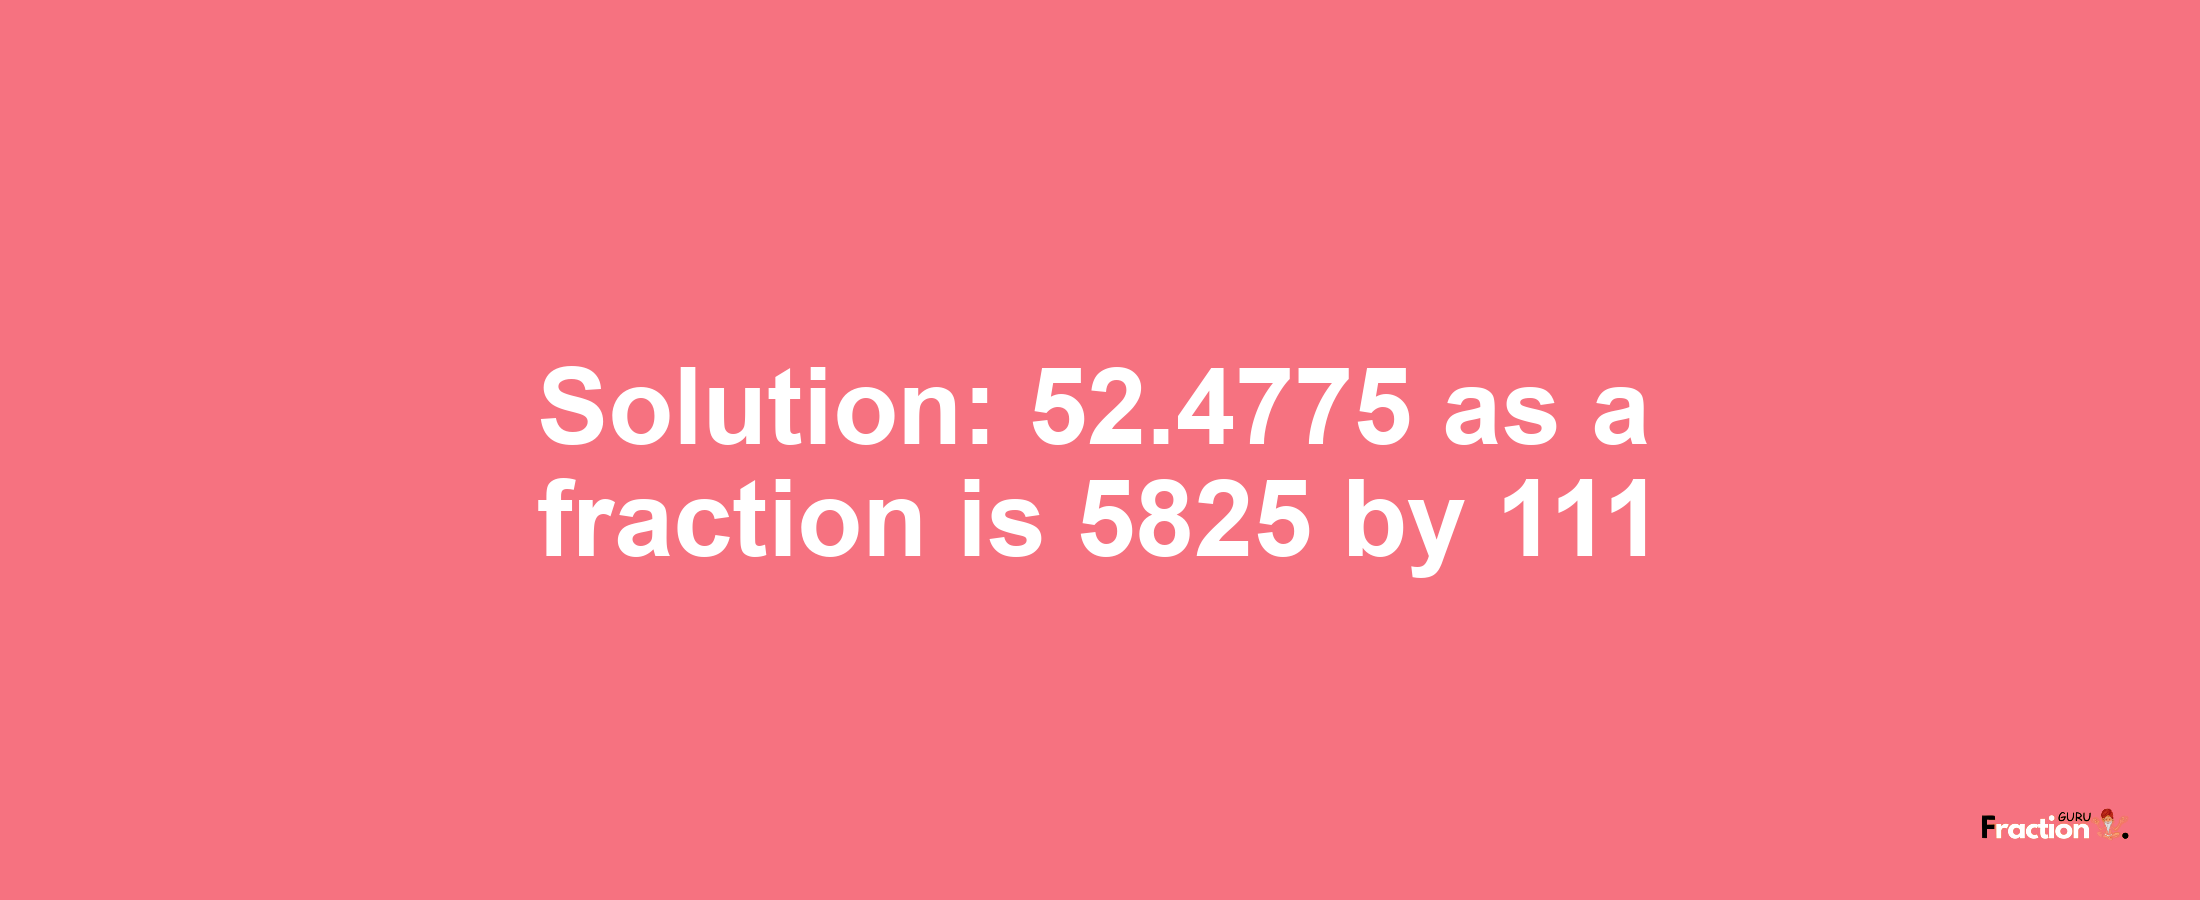 Solution:52.4775 as a fraction is 5825/111